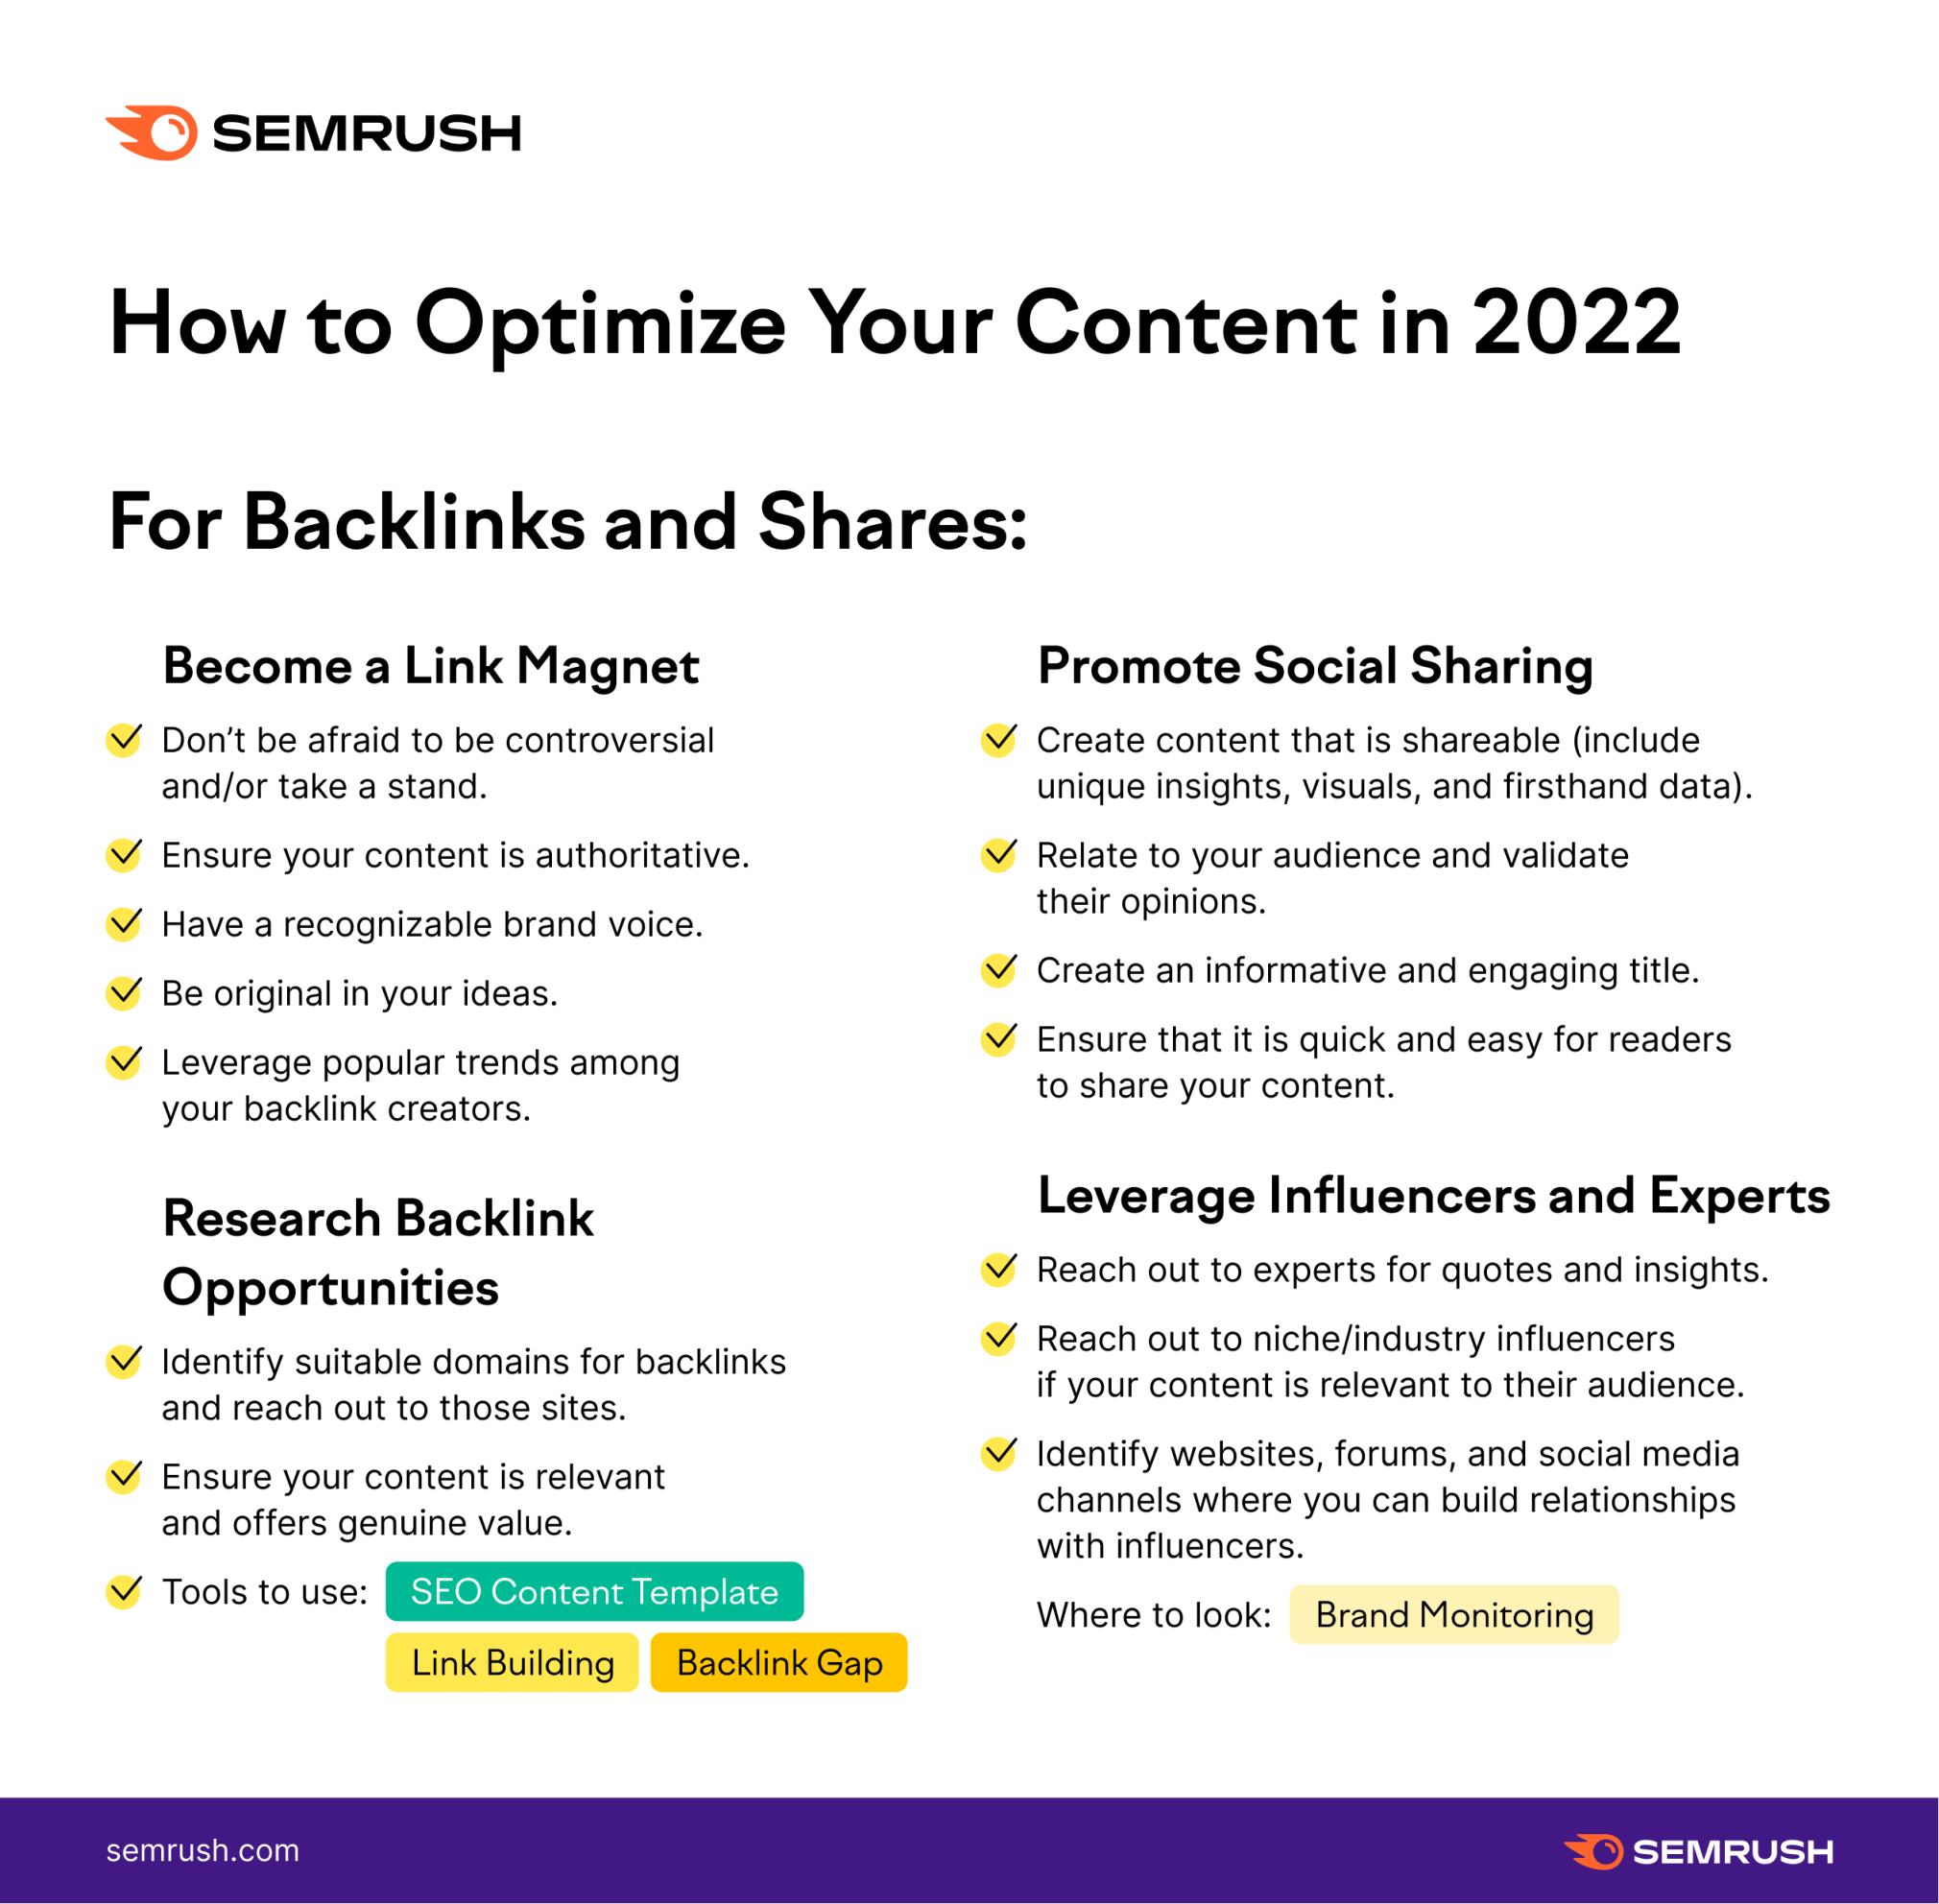 How to optimize content for backlinks and shares